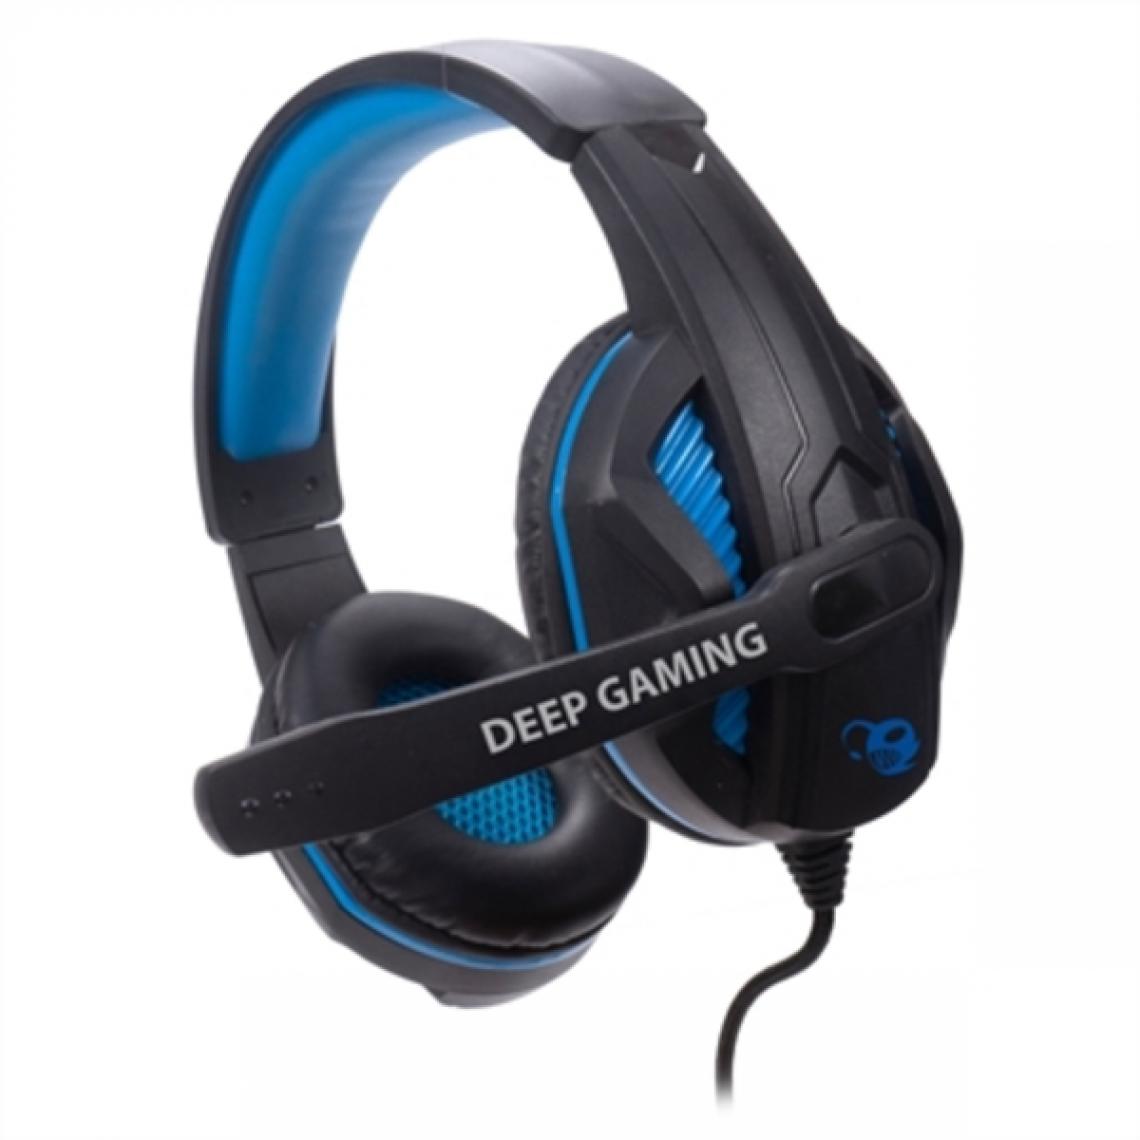 Coolbox - Casque avec Microphone Gaming CoolBox deepBLUE G3 - Micro-Casque